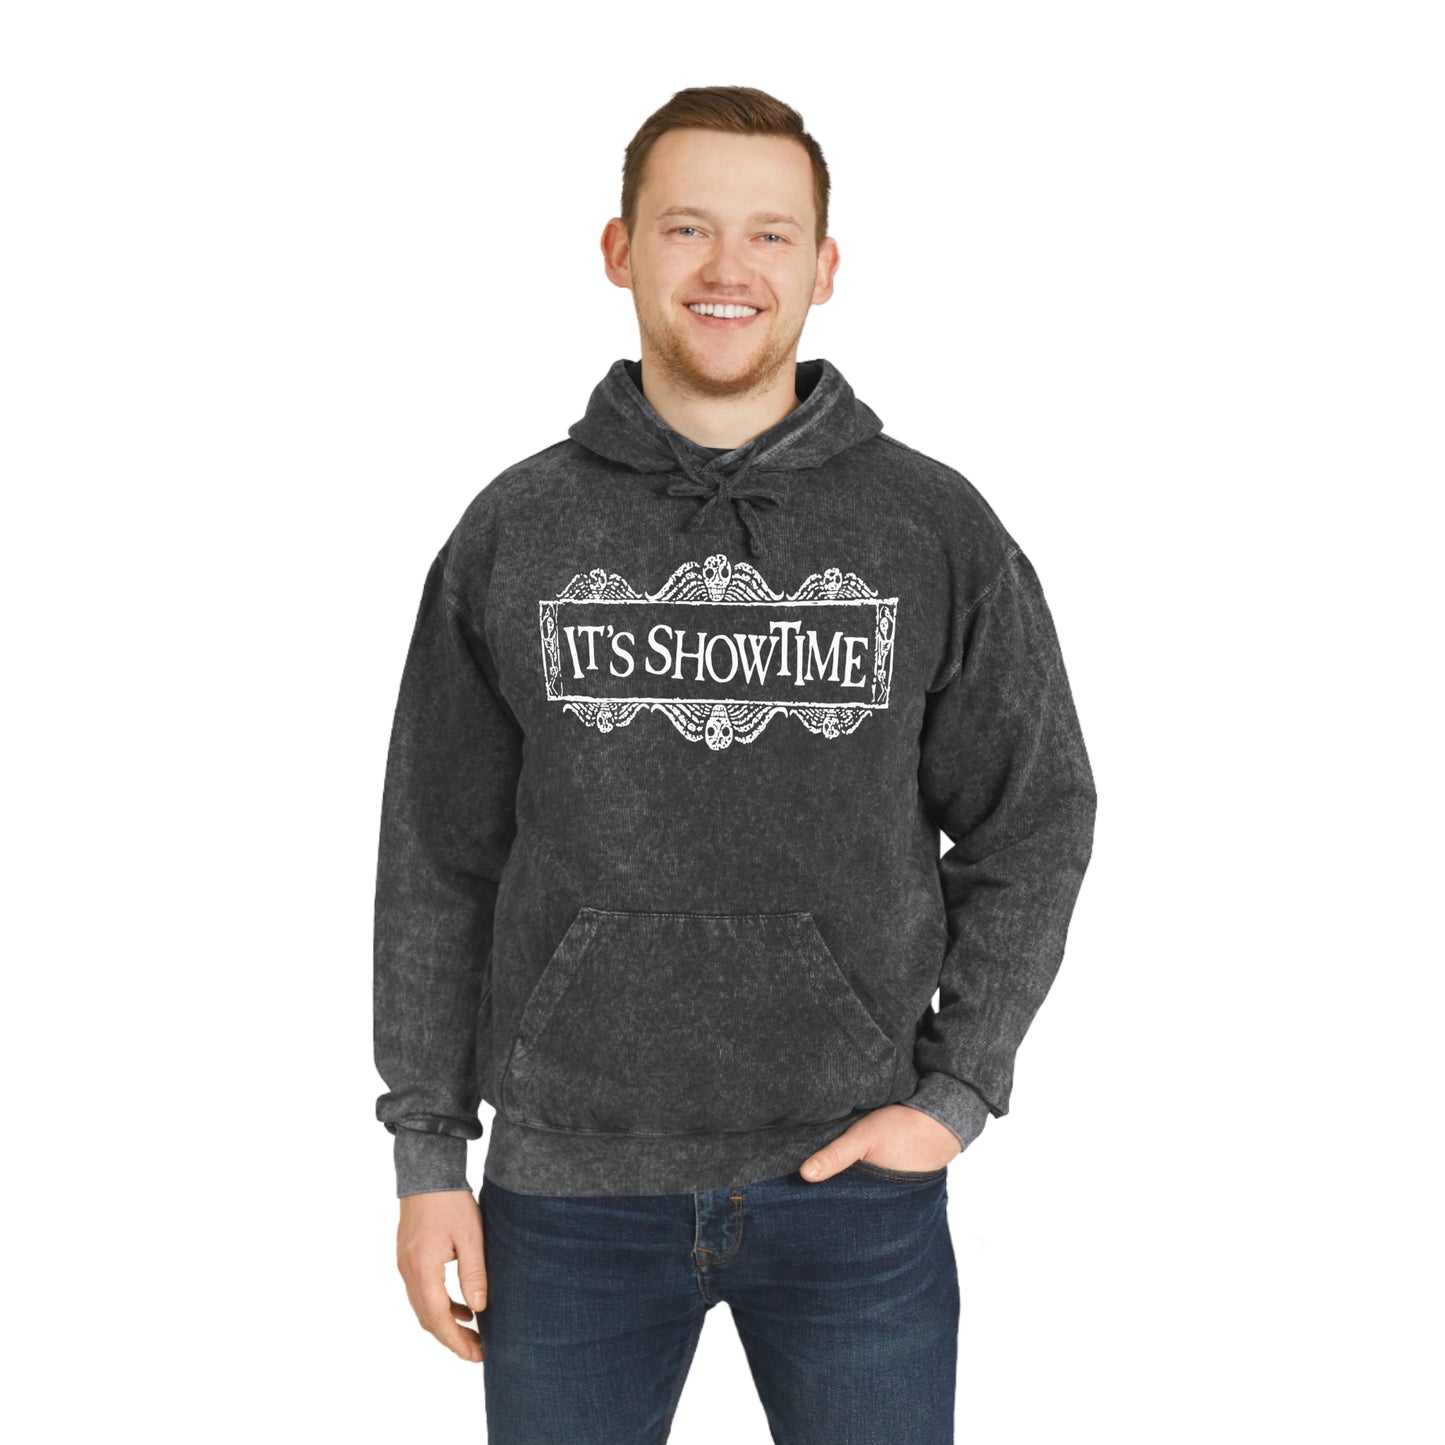 It's Showtime mineral wash hoodie